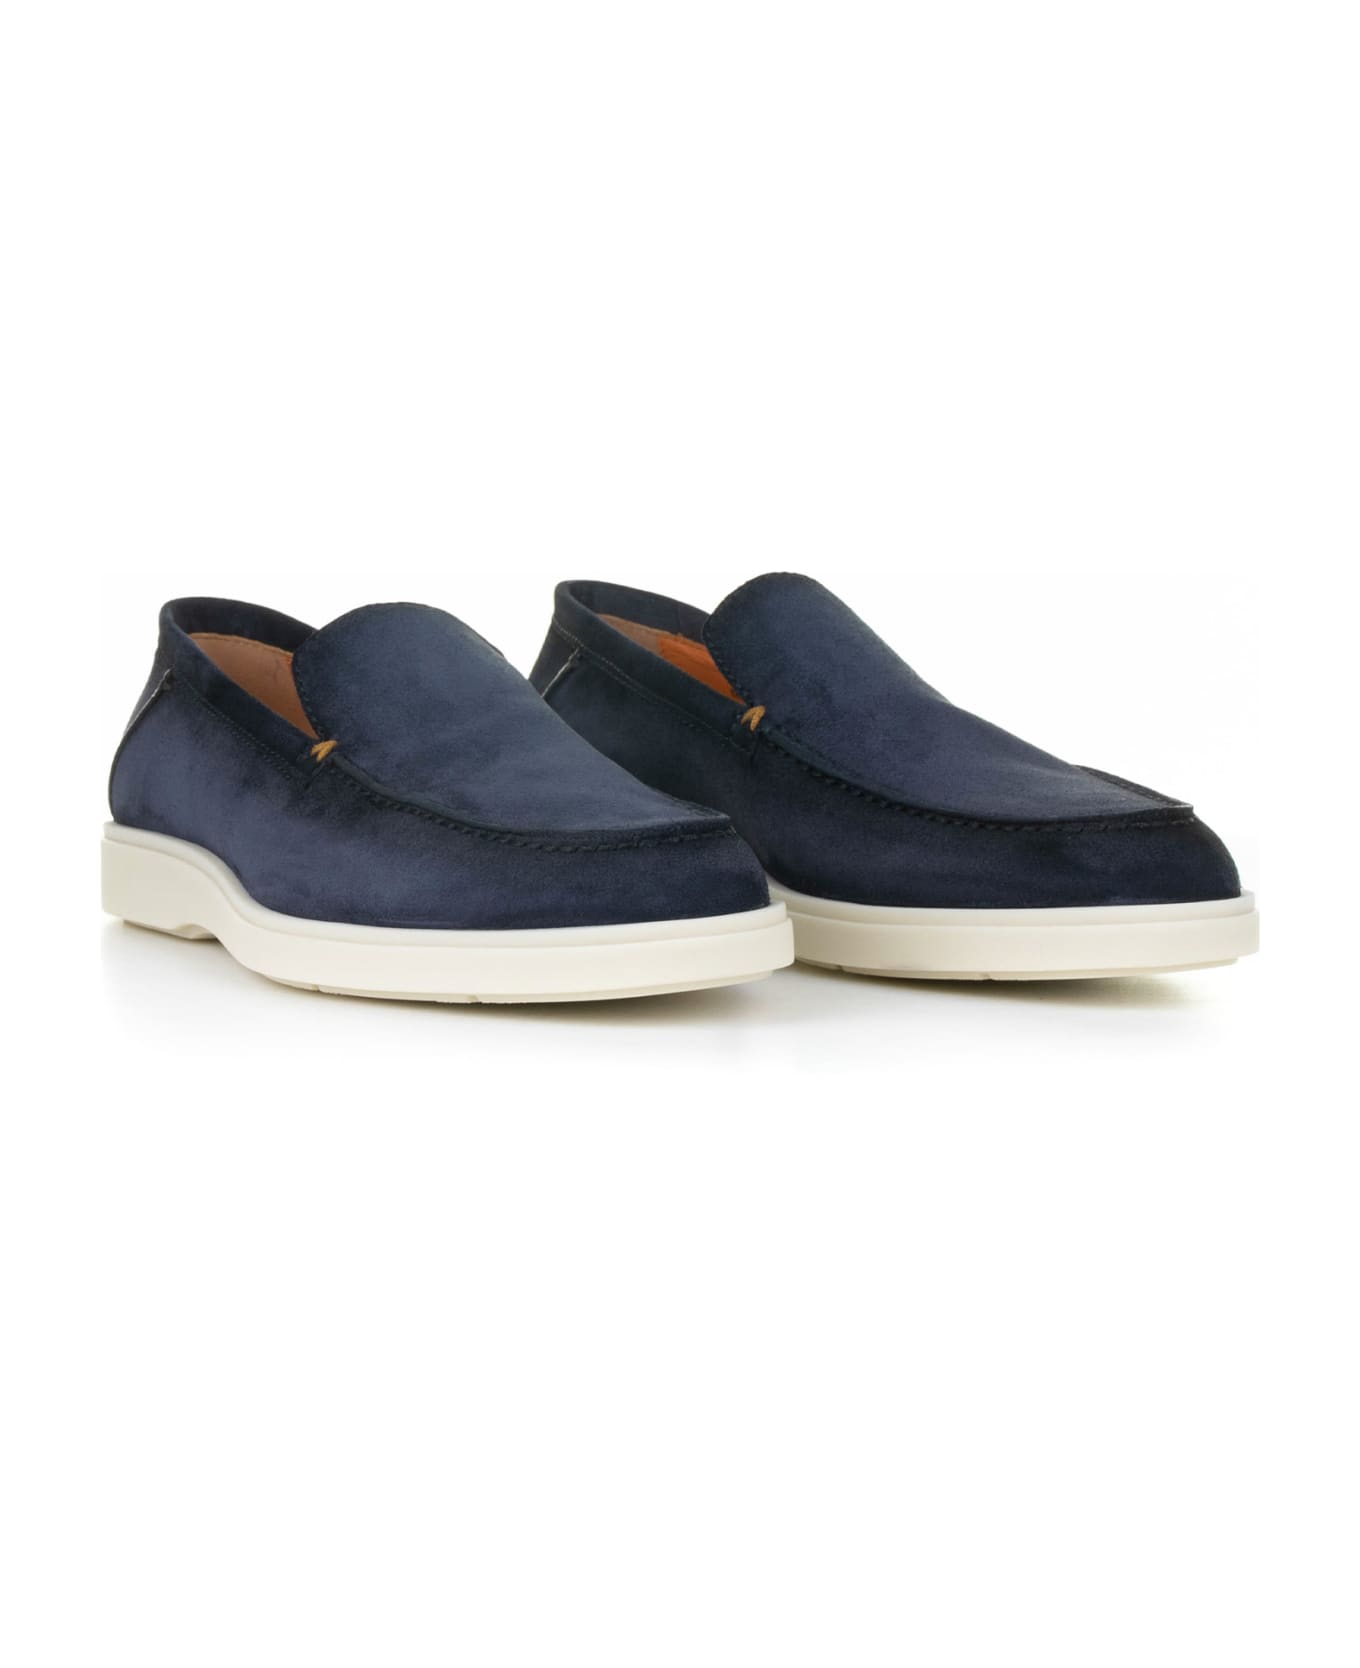 Santoni Moccasin In Blue Suede And Rubber Sole - BLUE ローファー＆デッキシューズ